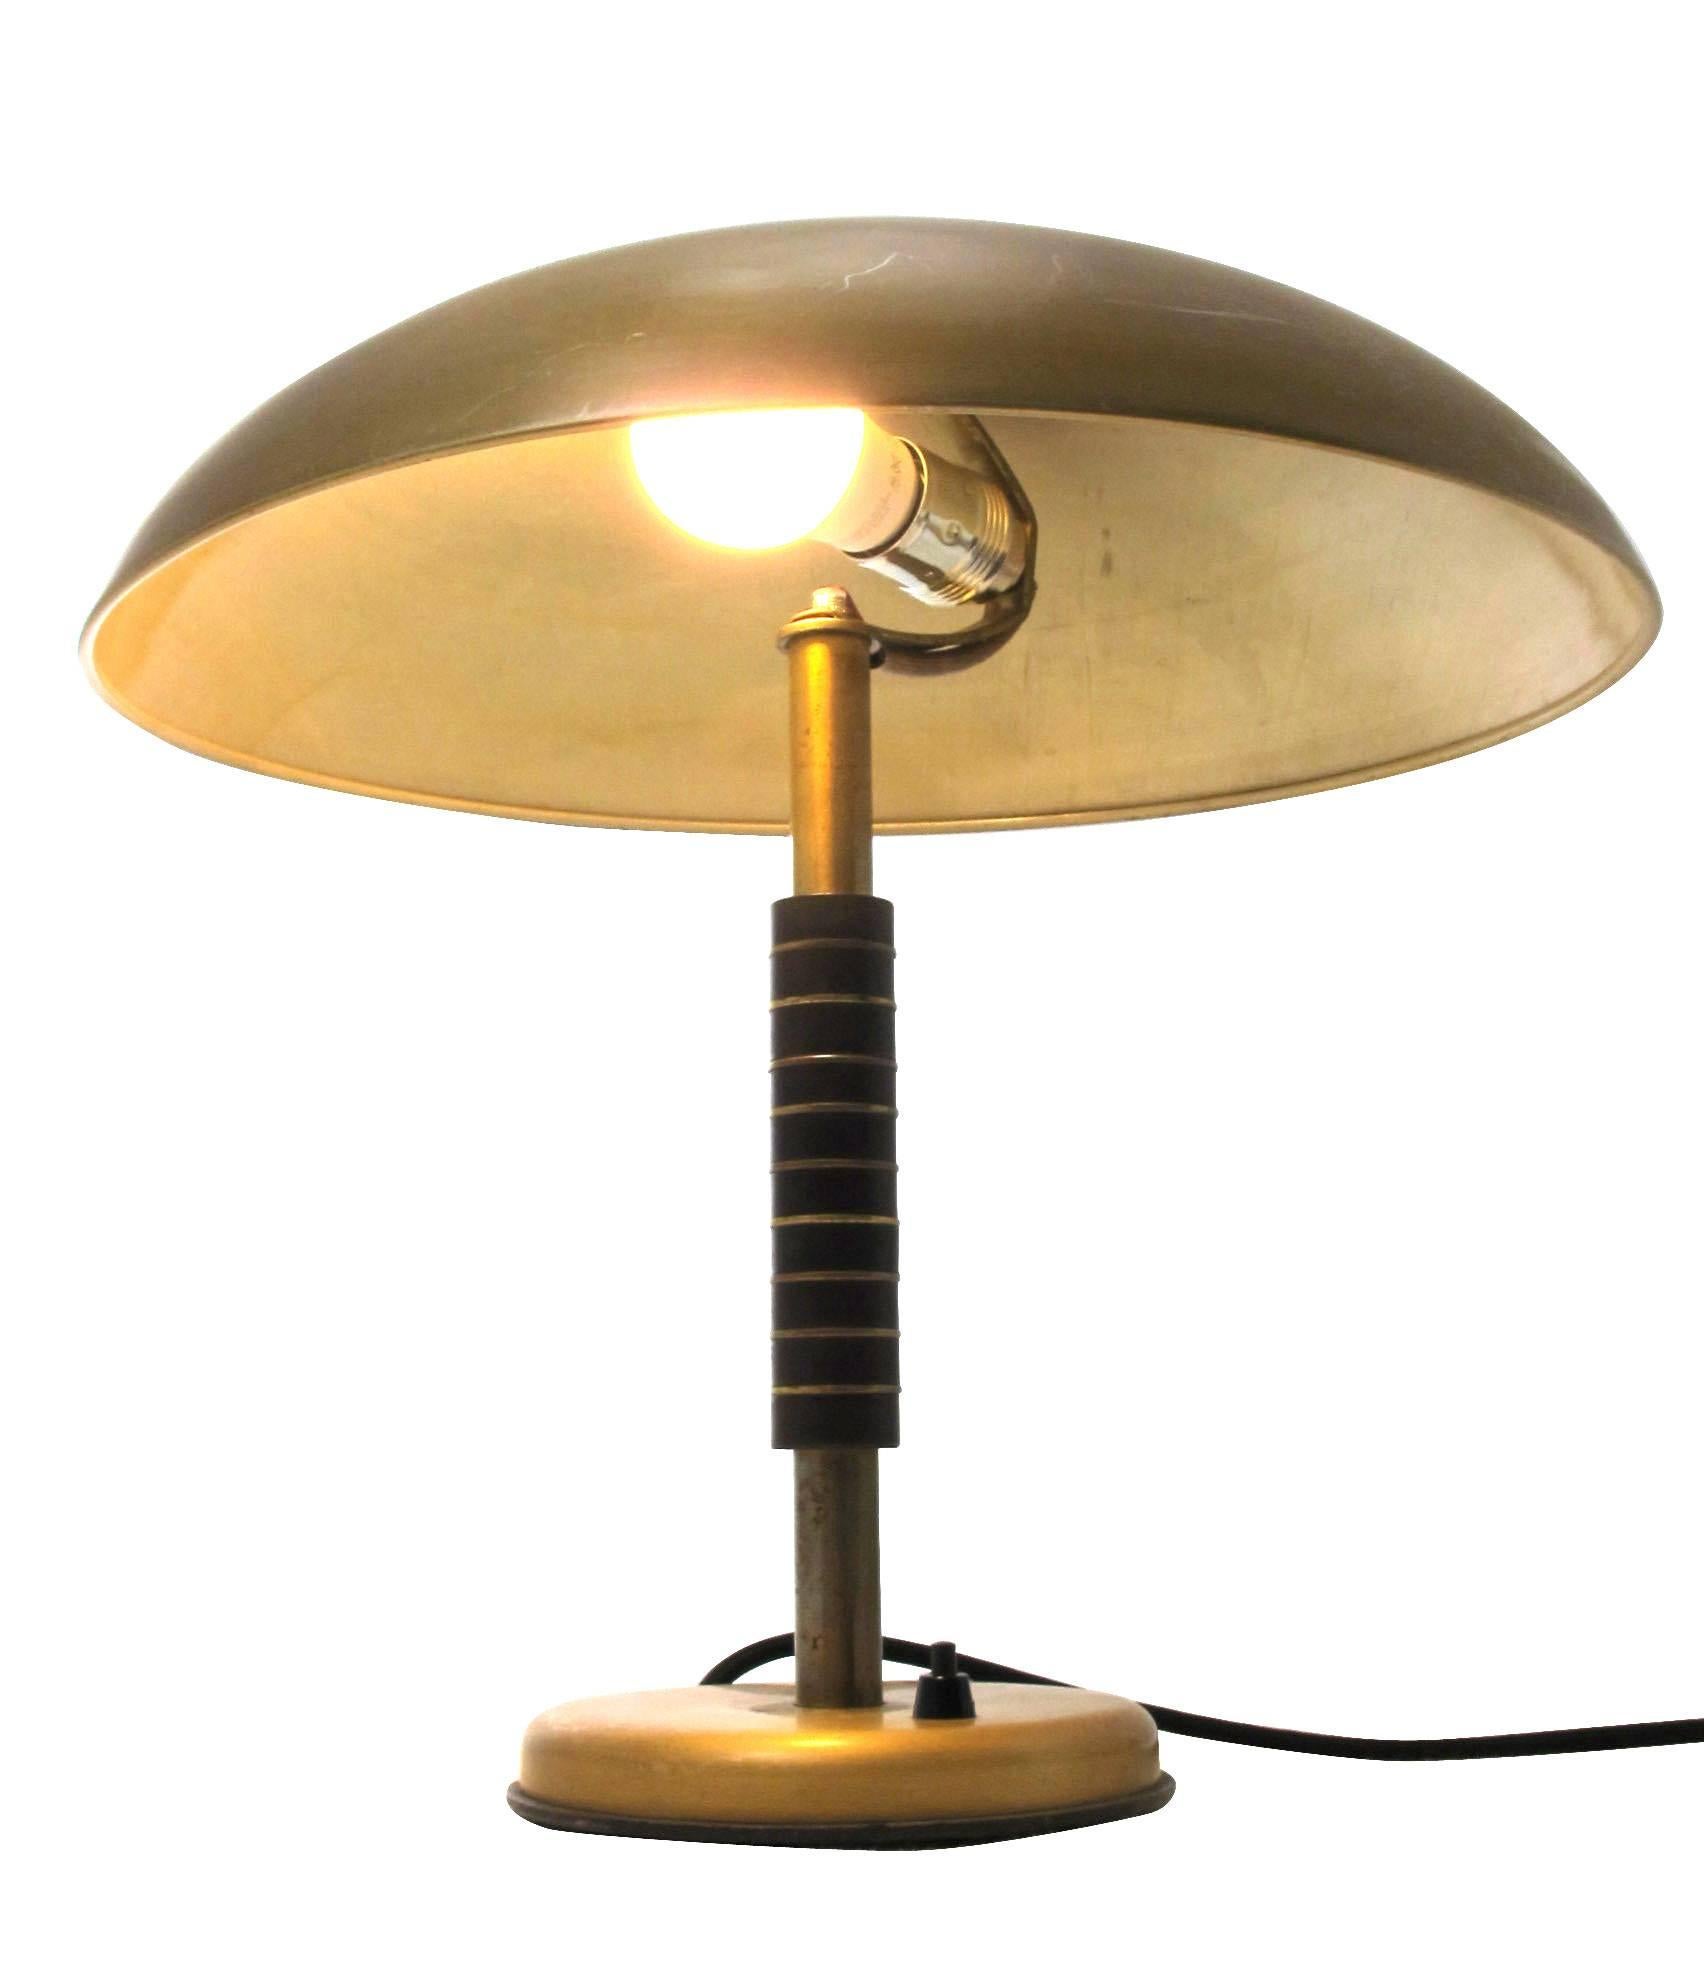  German Art Deco Table Lamp by SbF, 1944 For Sale 2